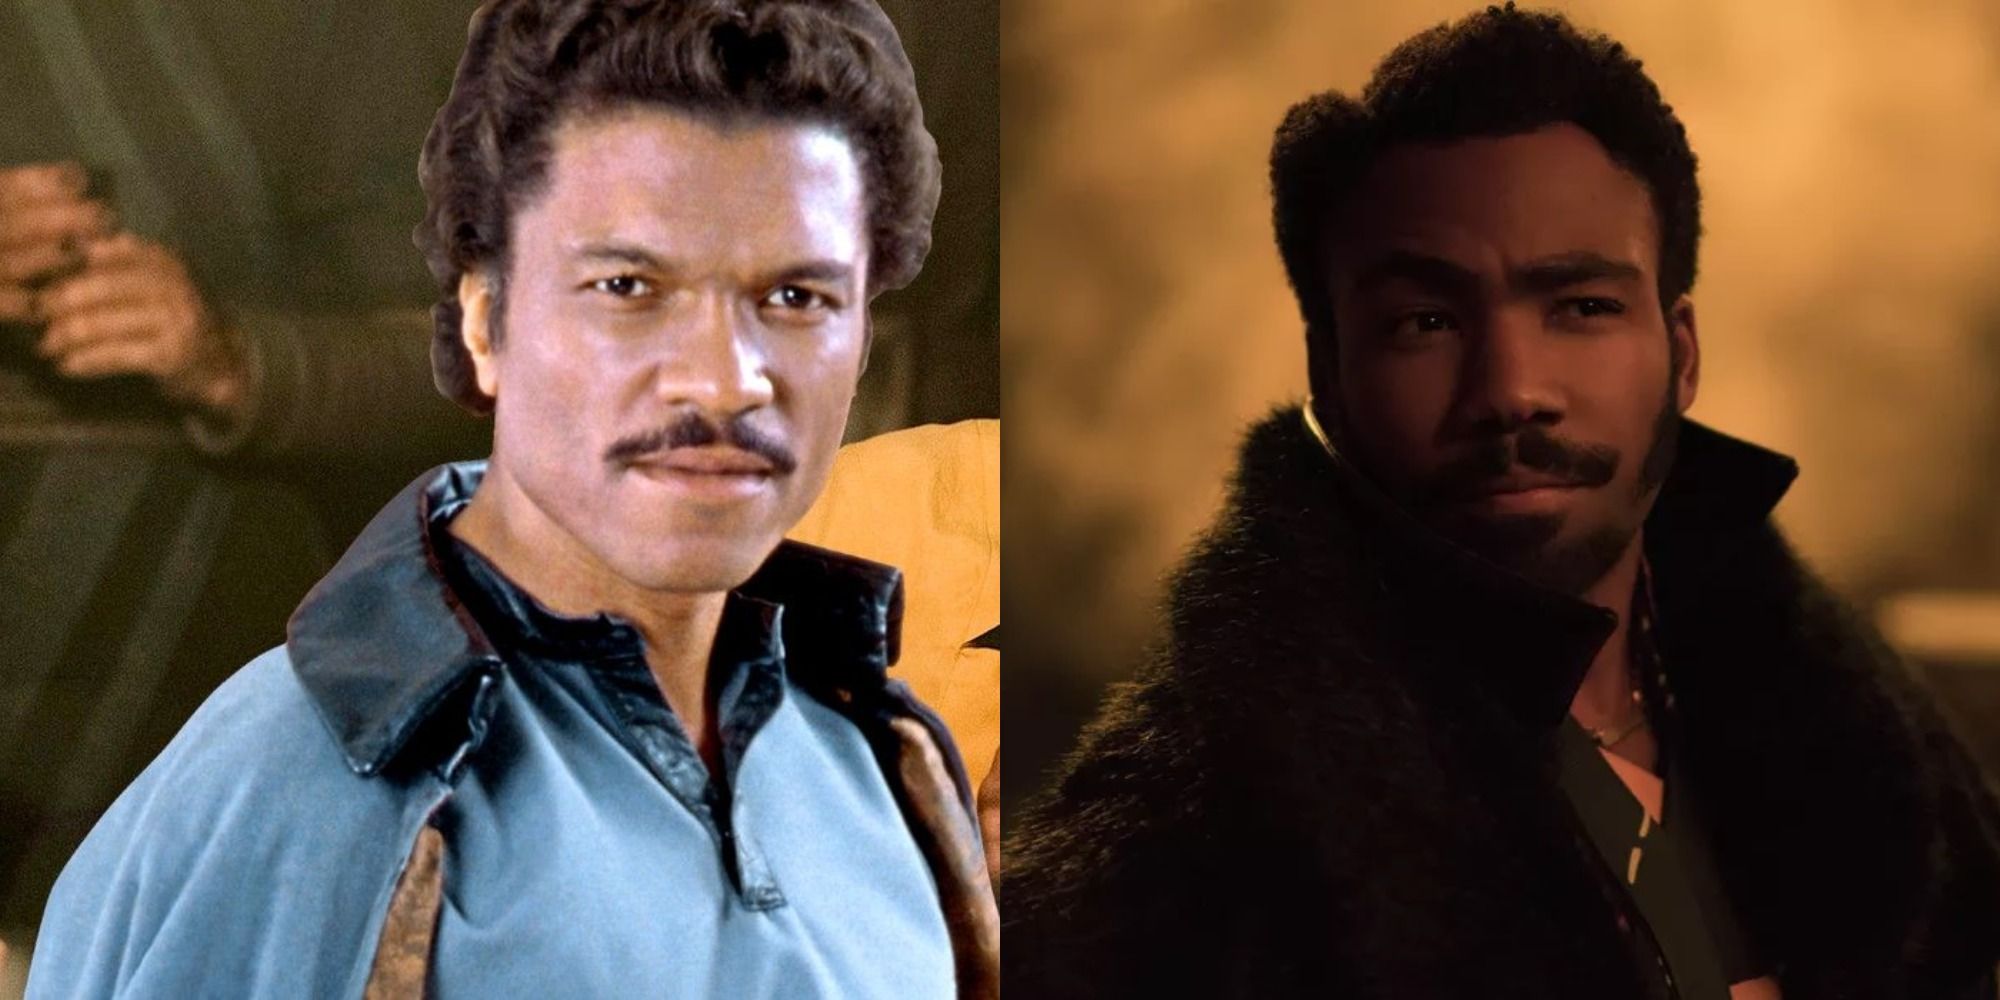 Lando Calrissian (Billy Dee Williams) in The Empire Strikes Back and Lando Calrissian (Donald Glover) in Solo: A Star Wars Story